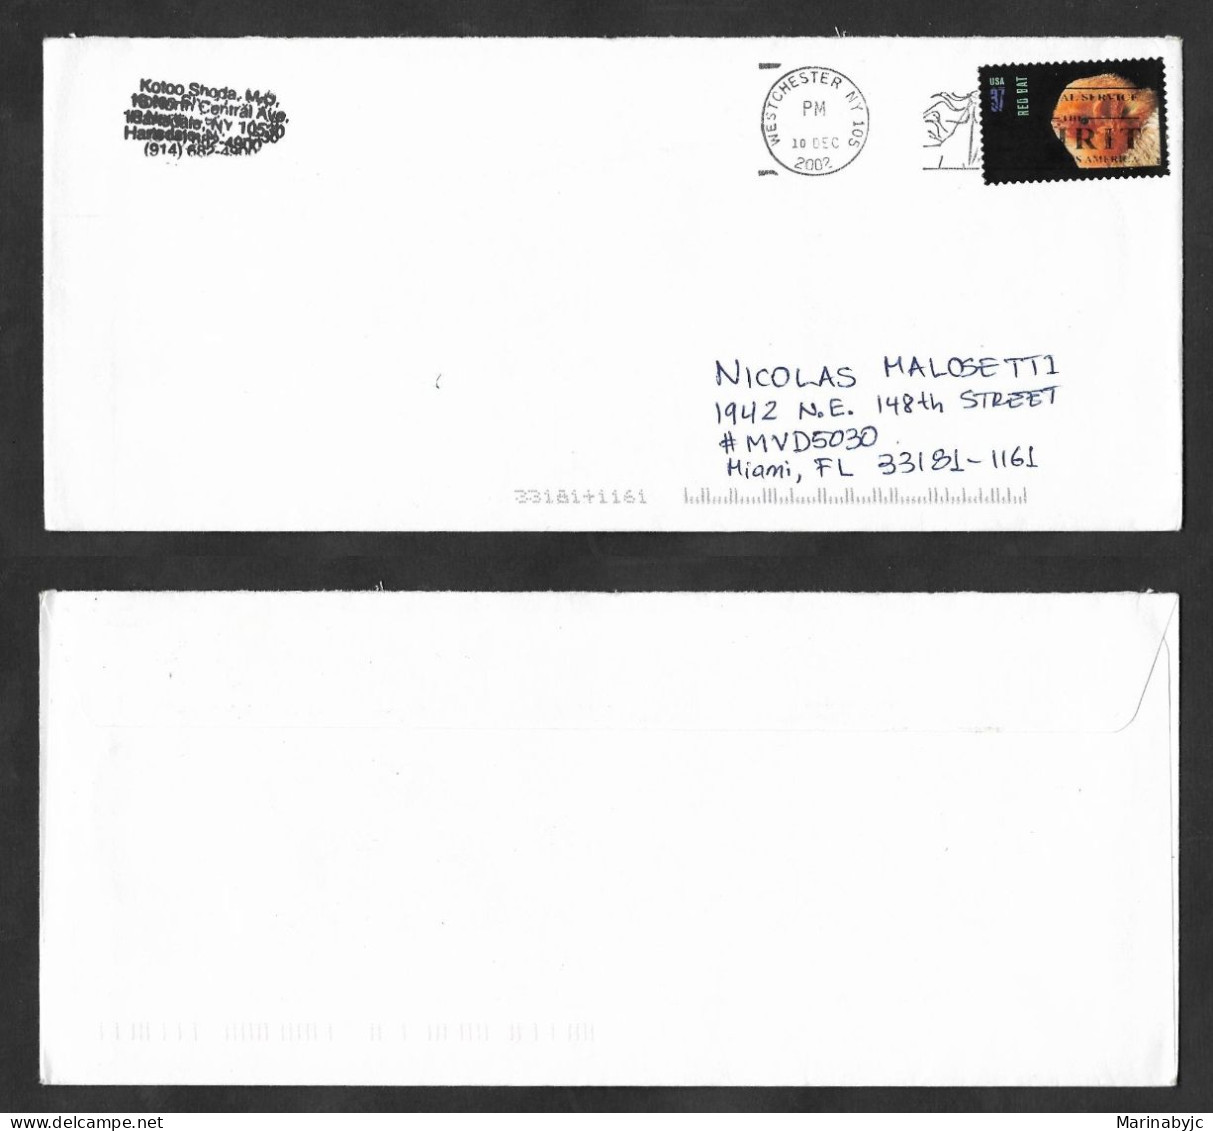 SE)2002 UNITED STATES, BATS OF AMERICA, RED BAT, CIRCULATED COVER FROM NEW YORK TO MIAMI USA, VF - Oblitérés